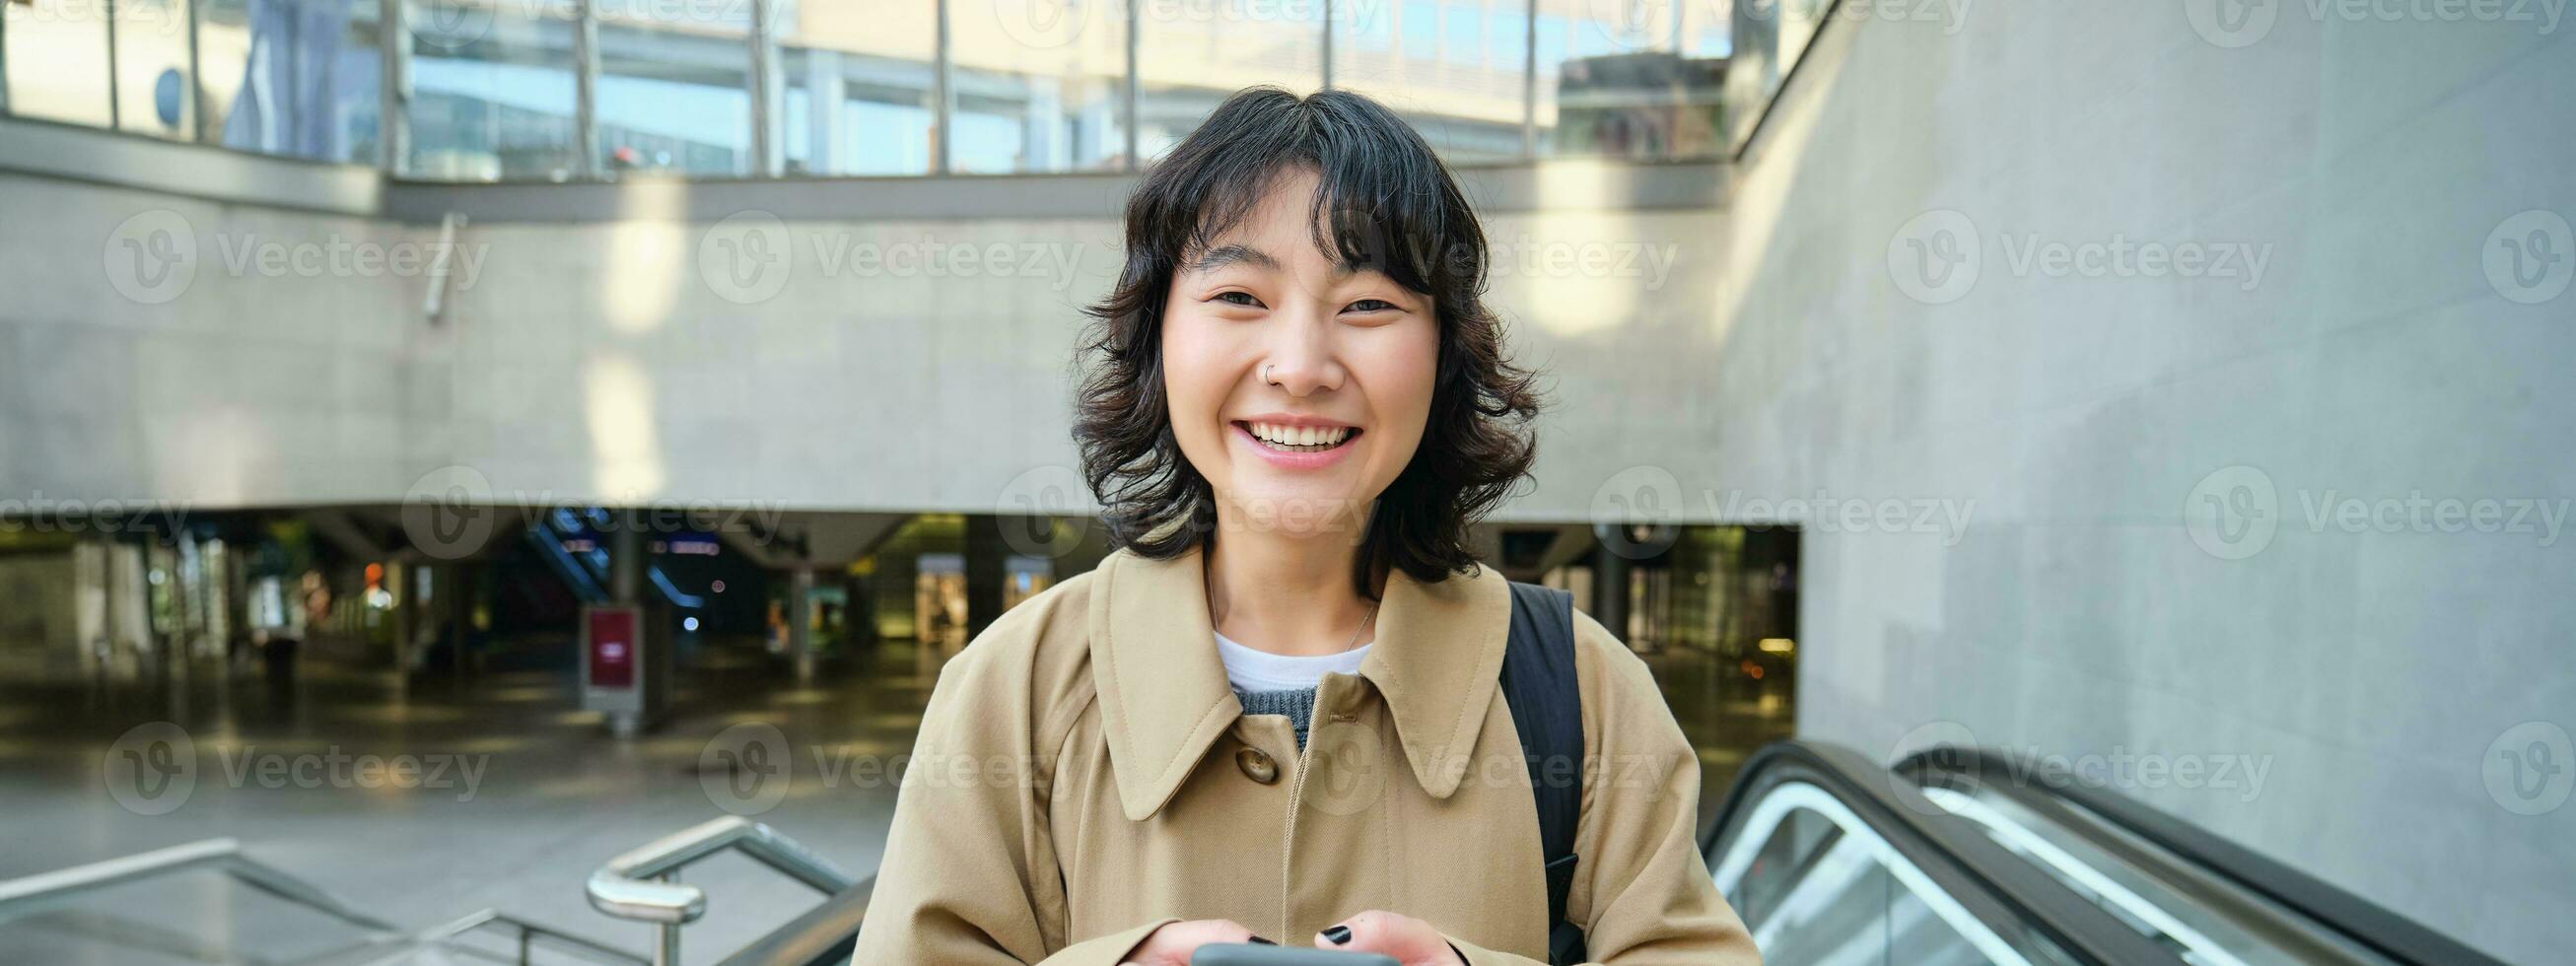 People in city. Young korean woman travels around city, goes up the escalator, uses her mobile phone and smiles photo